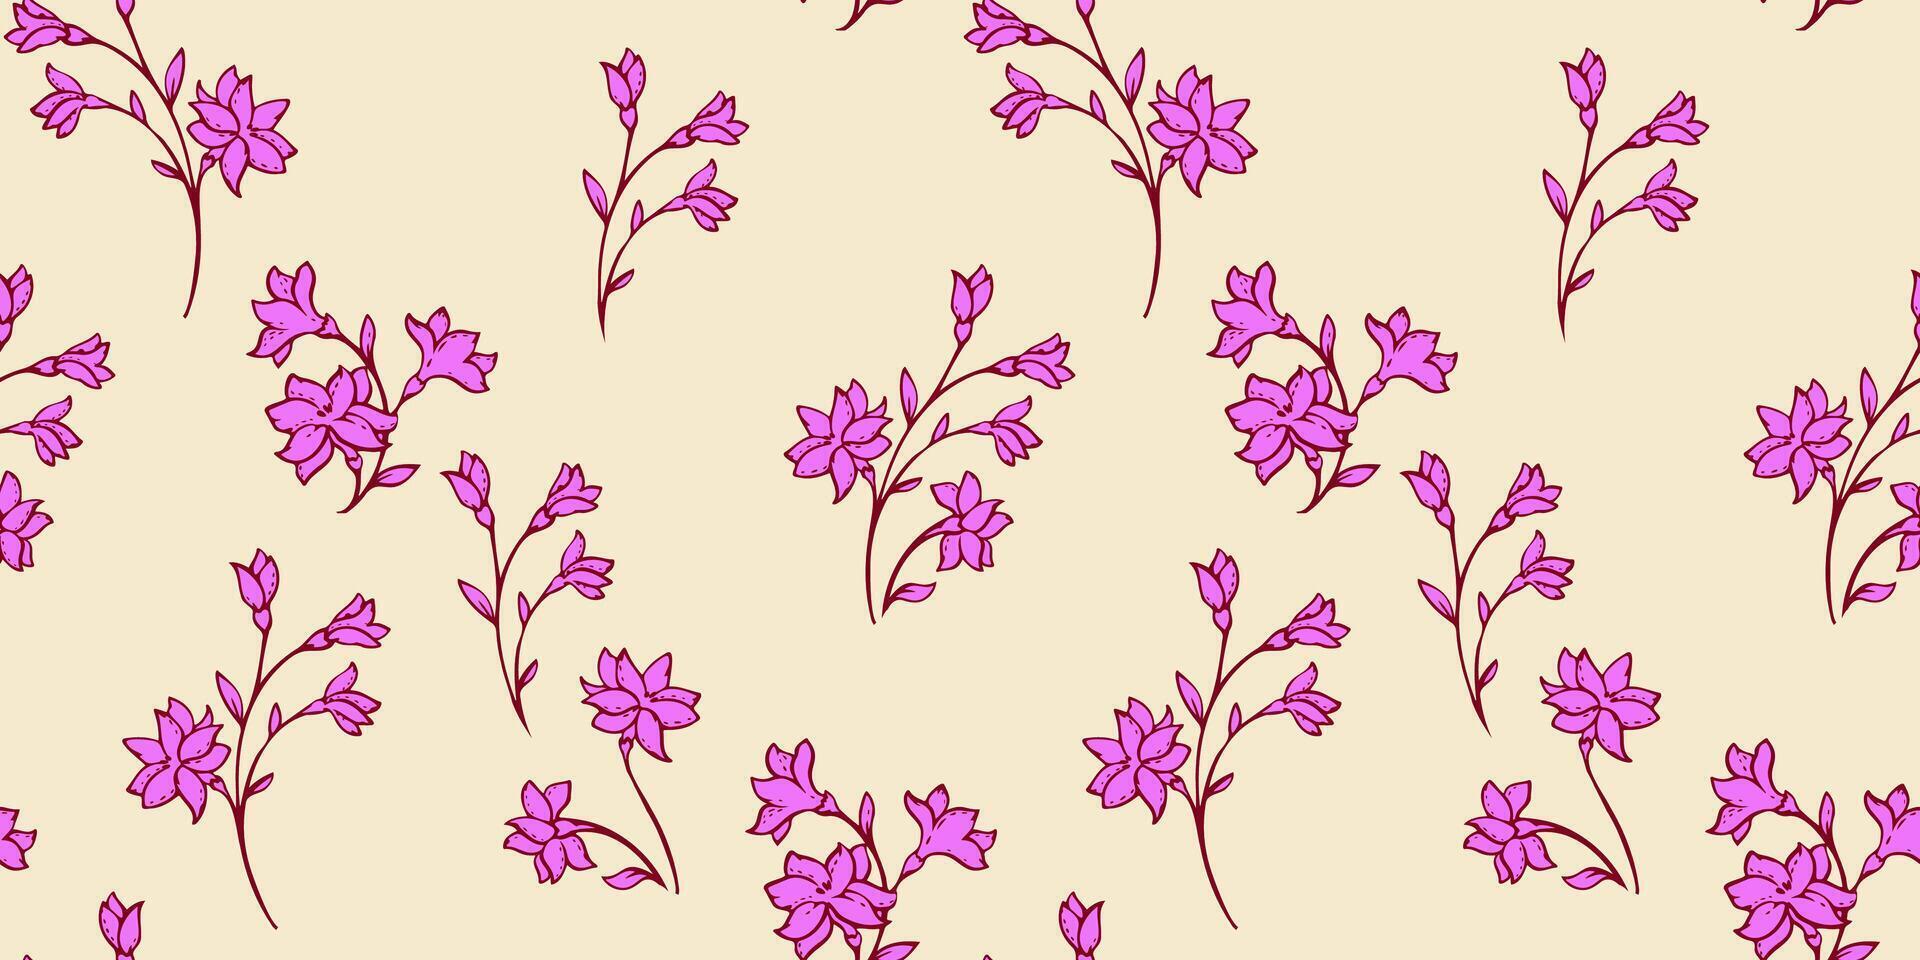 Pattern gentle, minimalistic branches flowers with buds scattered randomly. Vector hand drawn. Abstract bright purple tiny floral stems on the yellow background. Summer simple botanical printing.